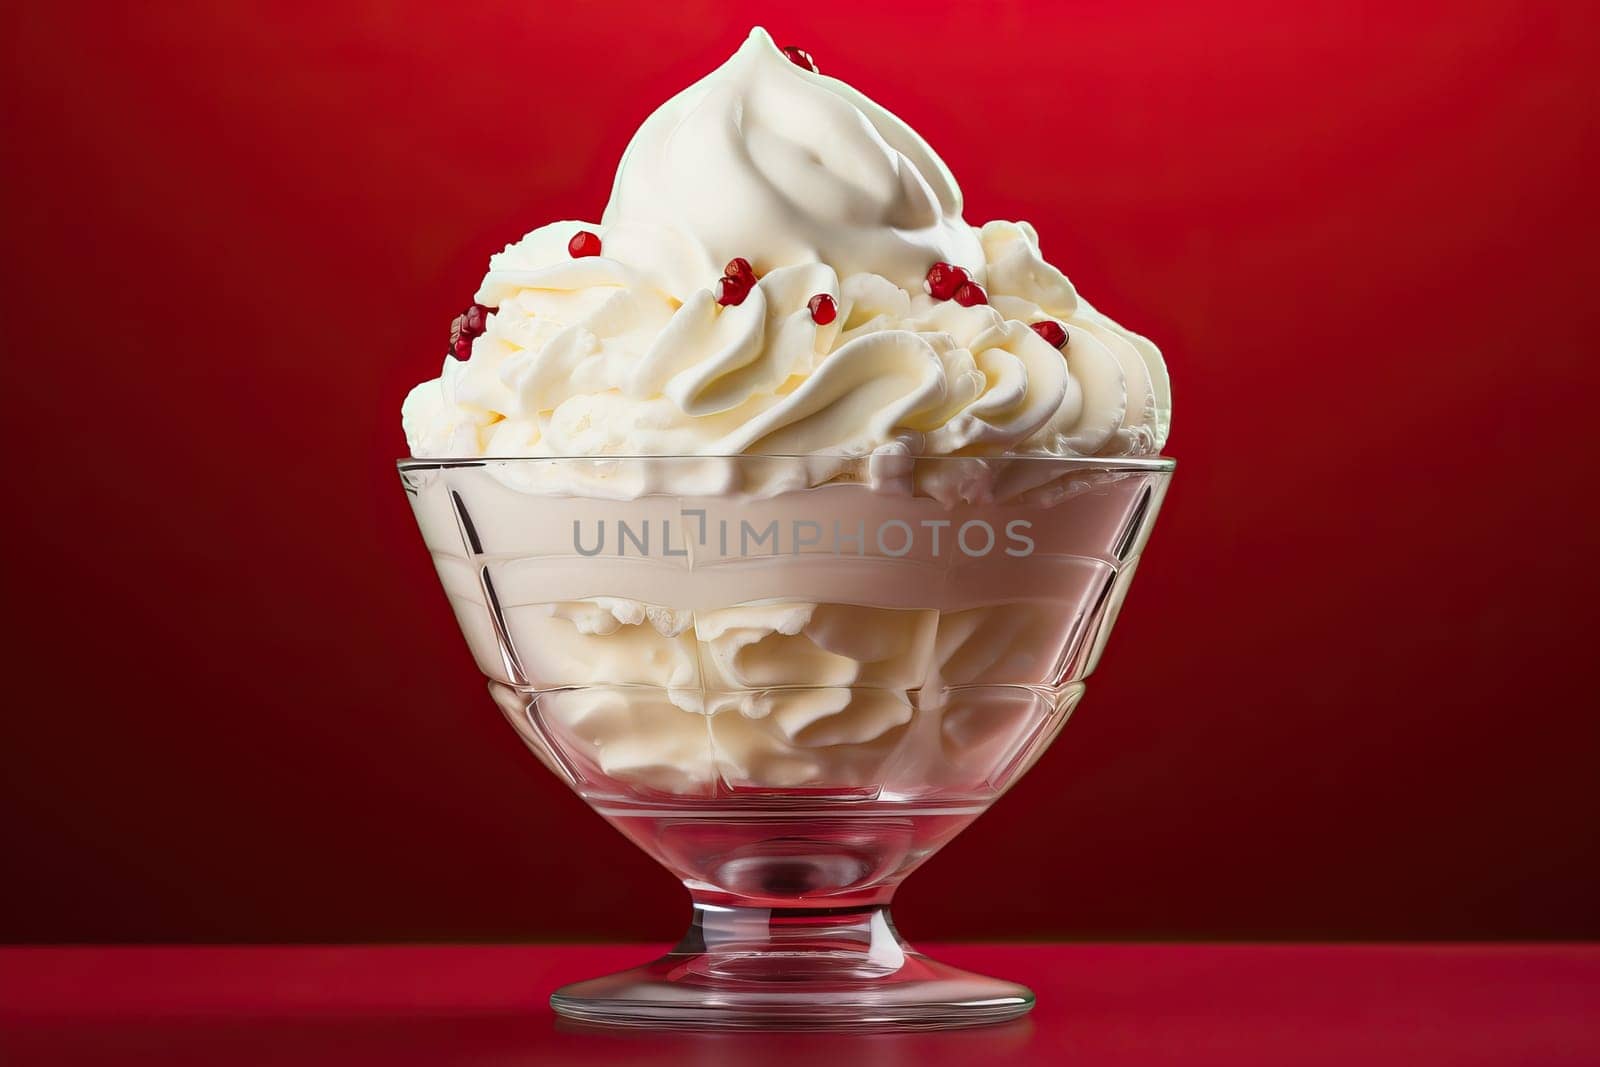 Vanilla ice cream in a glass cup, a large serving of ice cream on a red background.